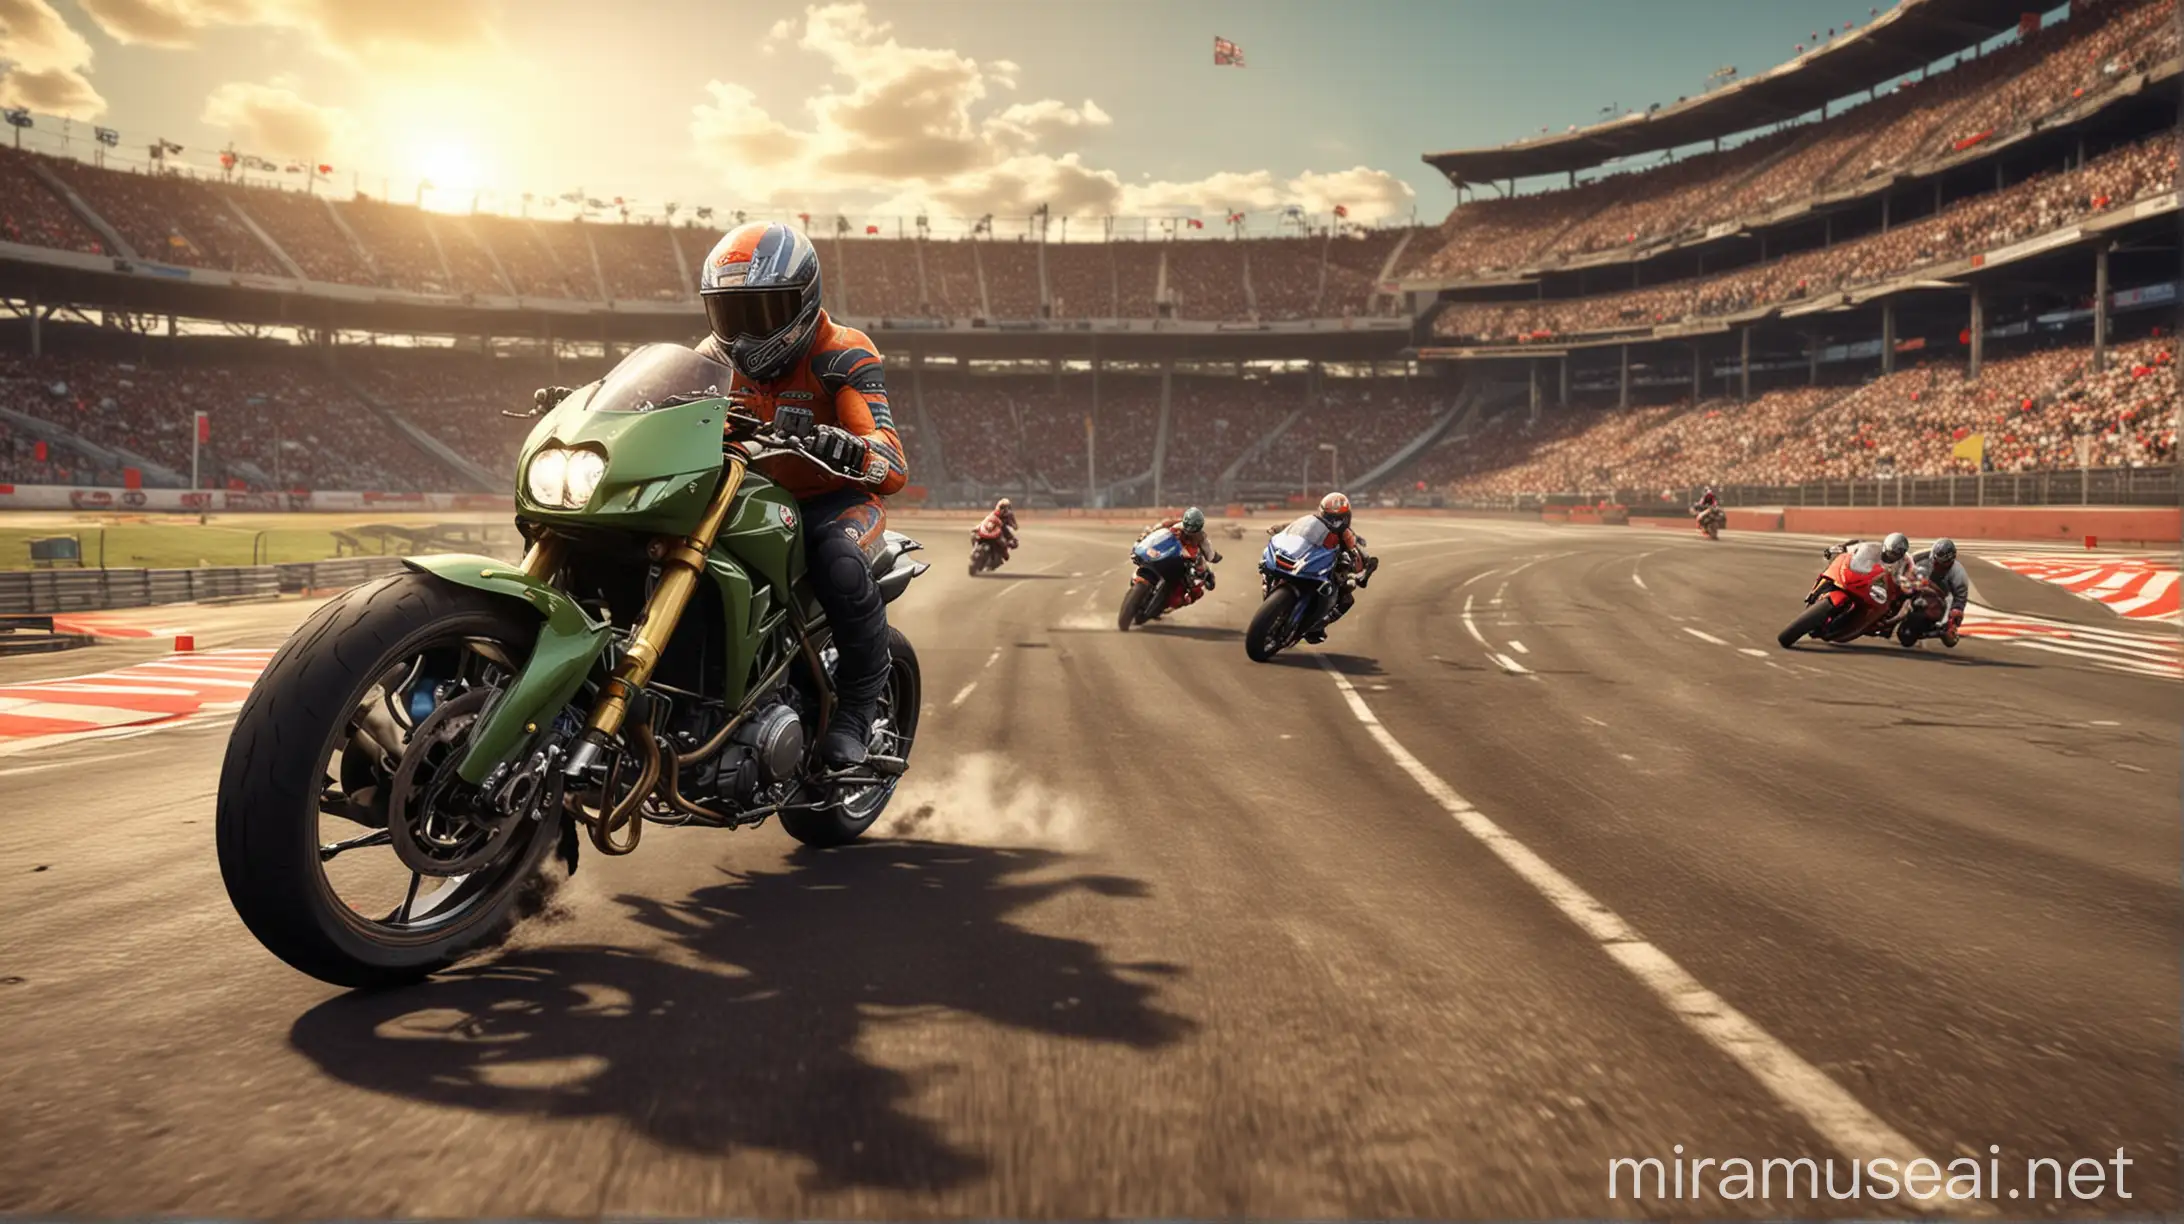 Dynamic 3D Motorcycle Racing Game with Stadium and Spectators